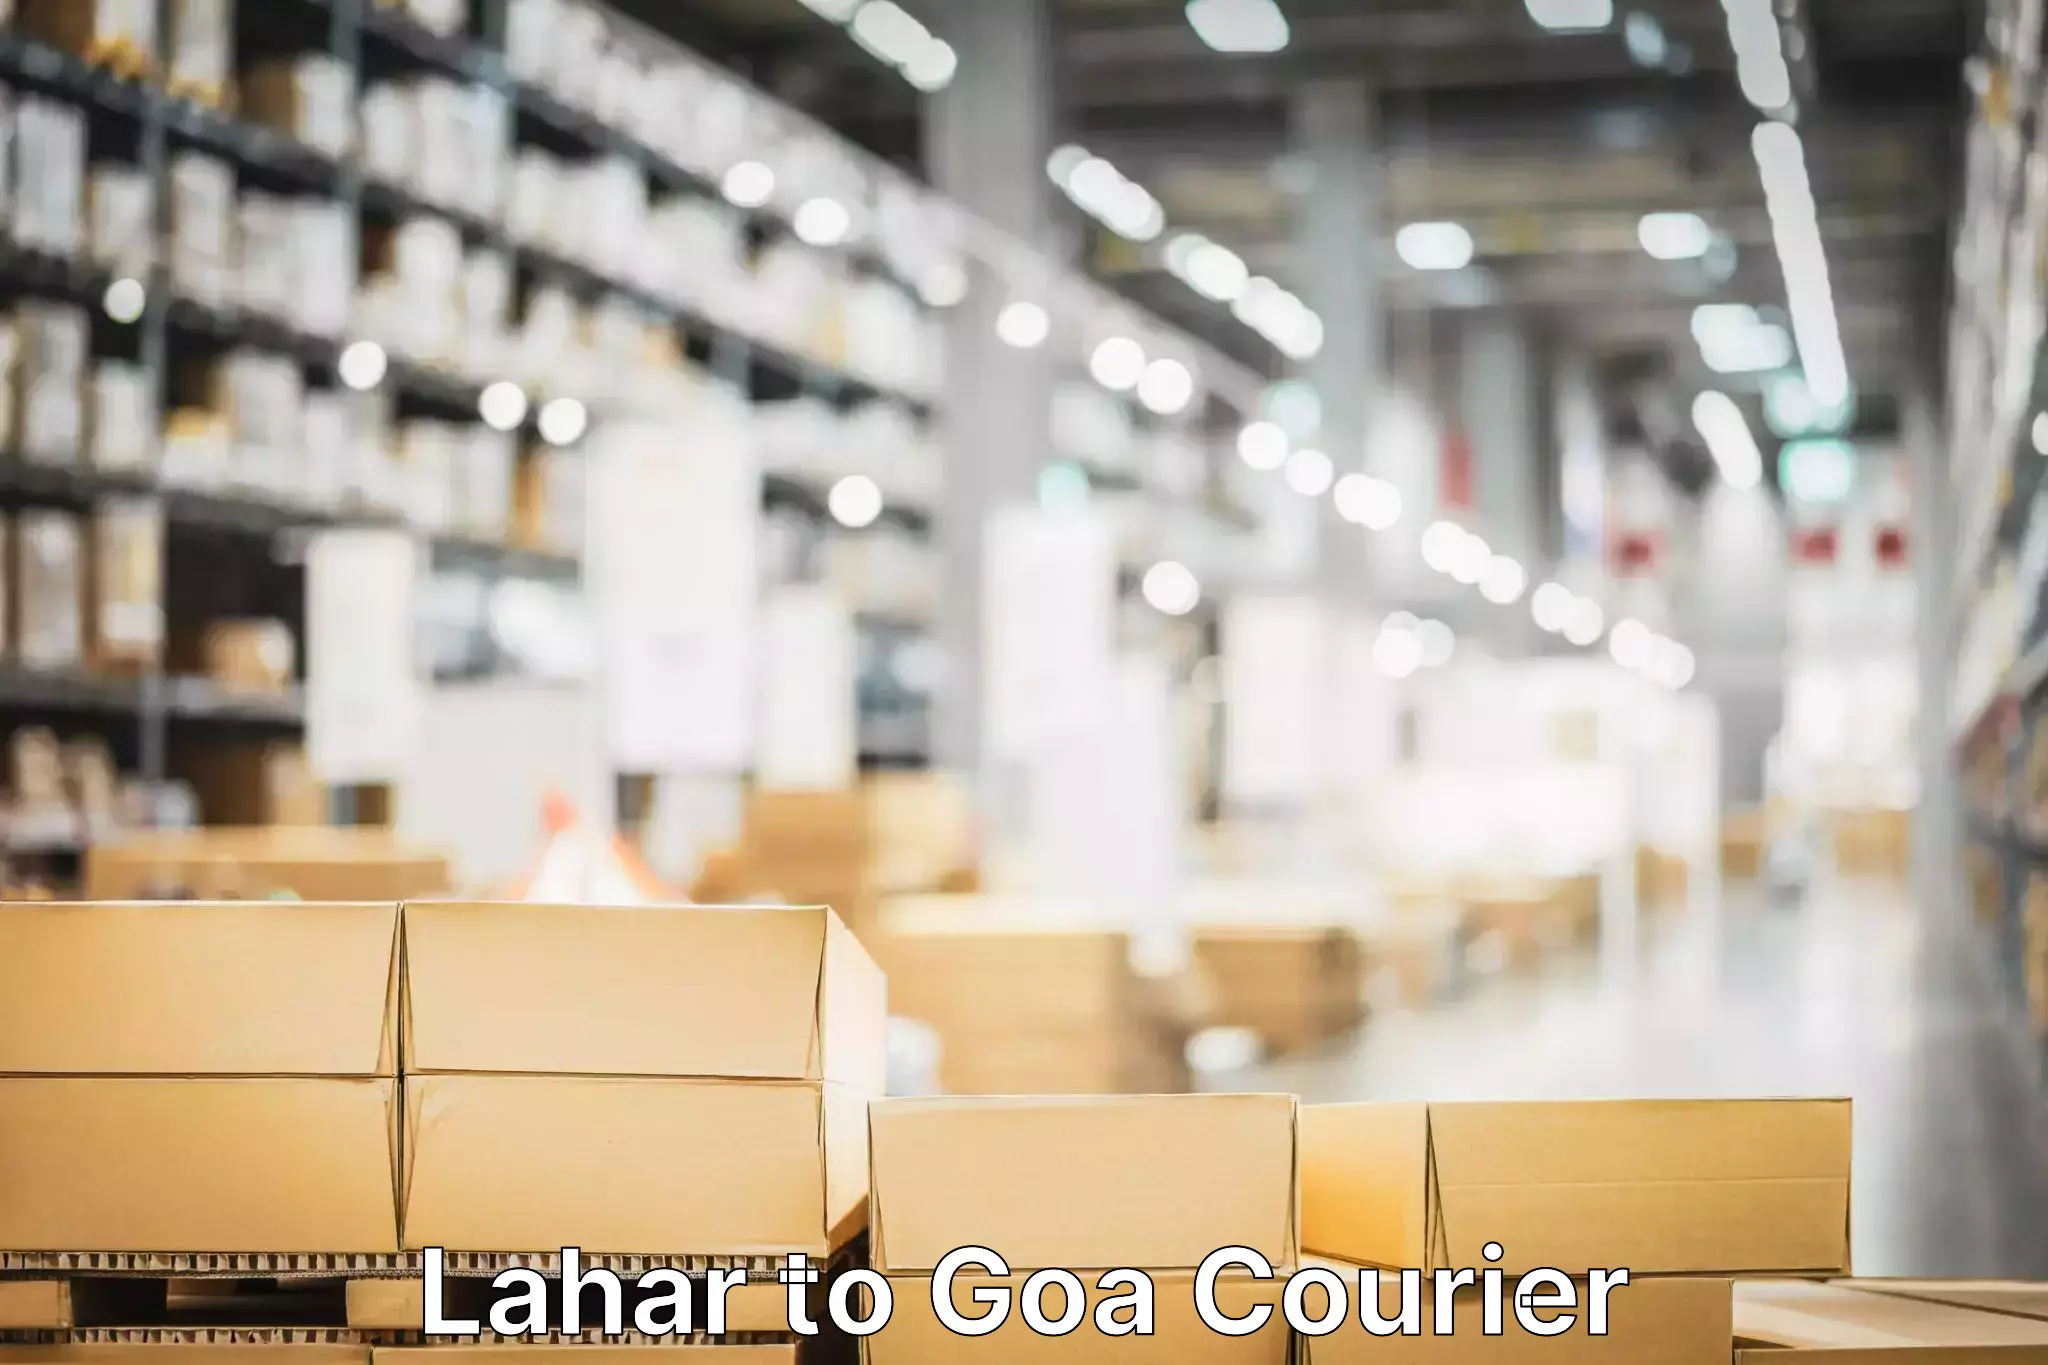 Global freight services Lahar to Goa